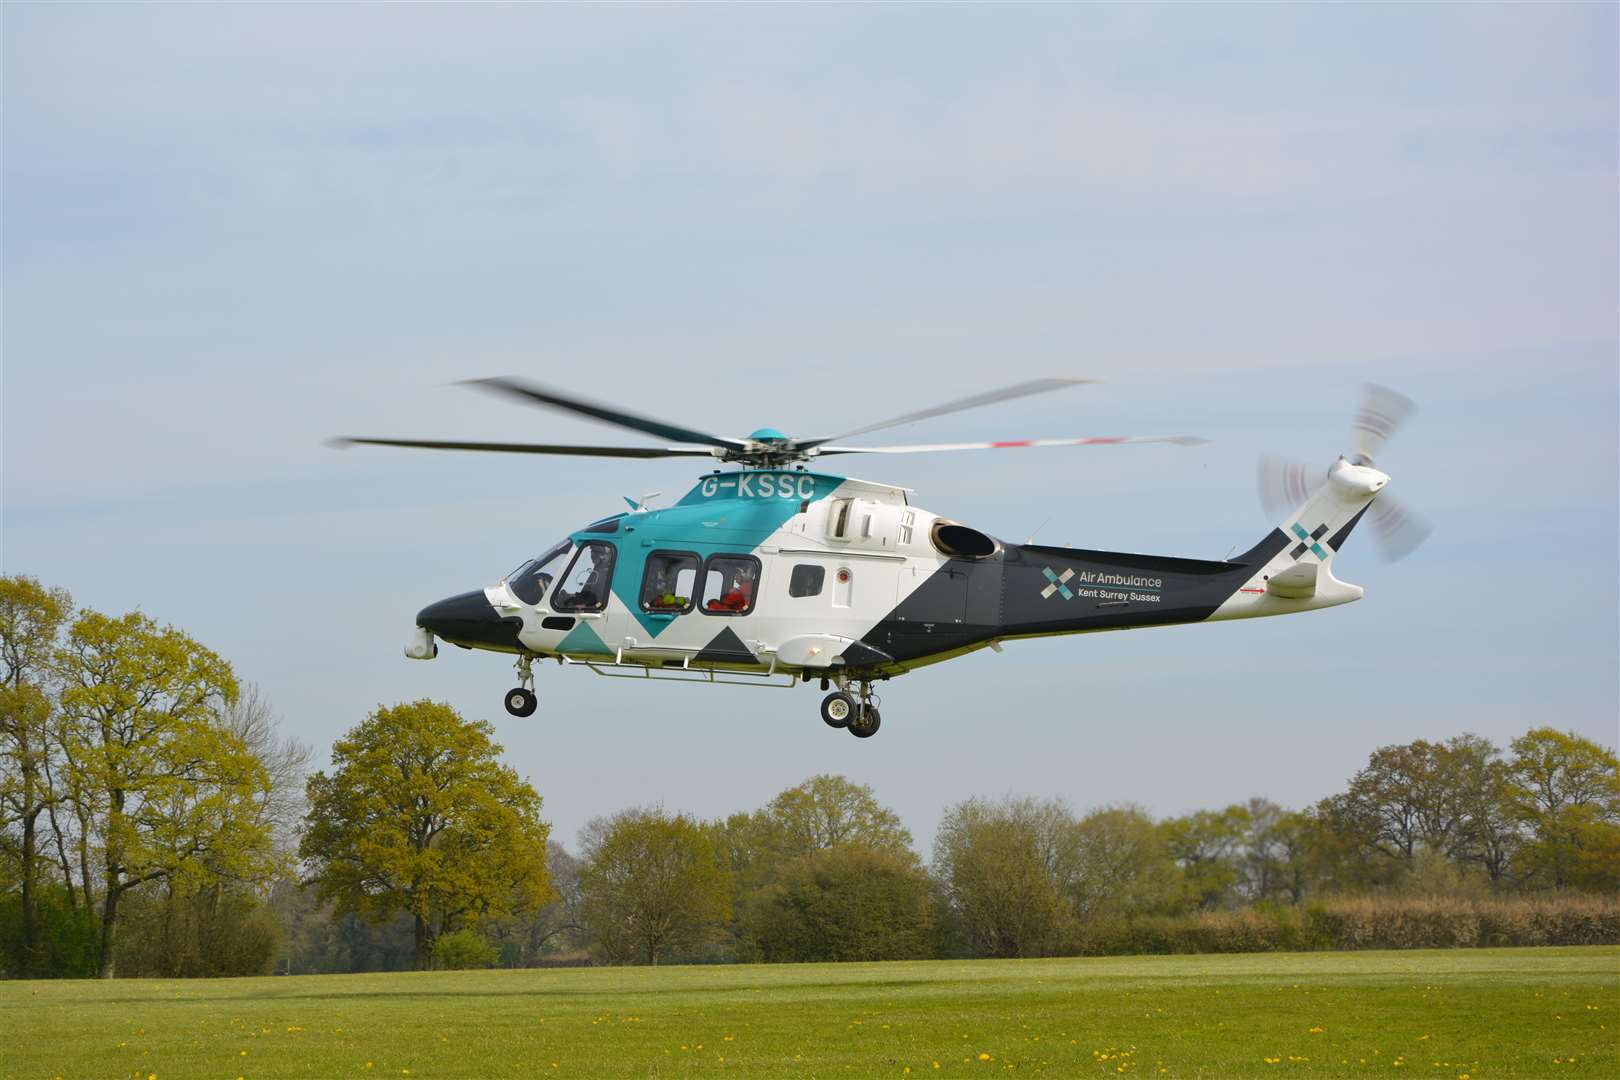 Kent, Surrey and Sussex Air Ambulance was called to a medical incident in Brompton Hill